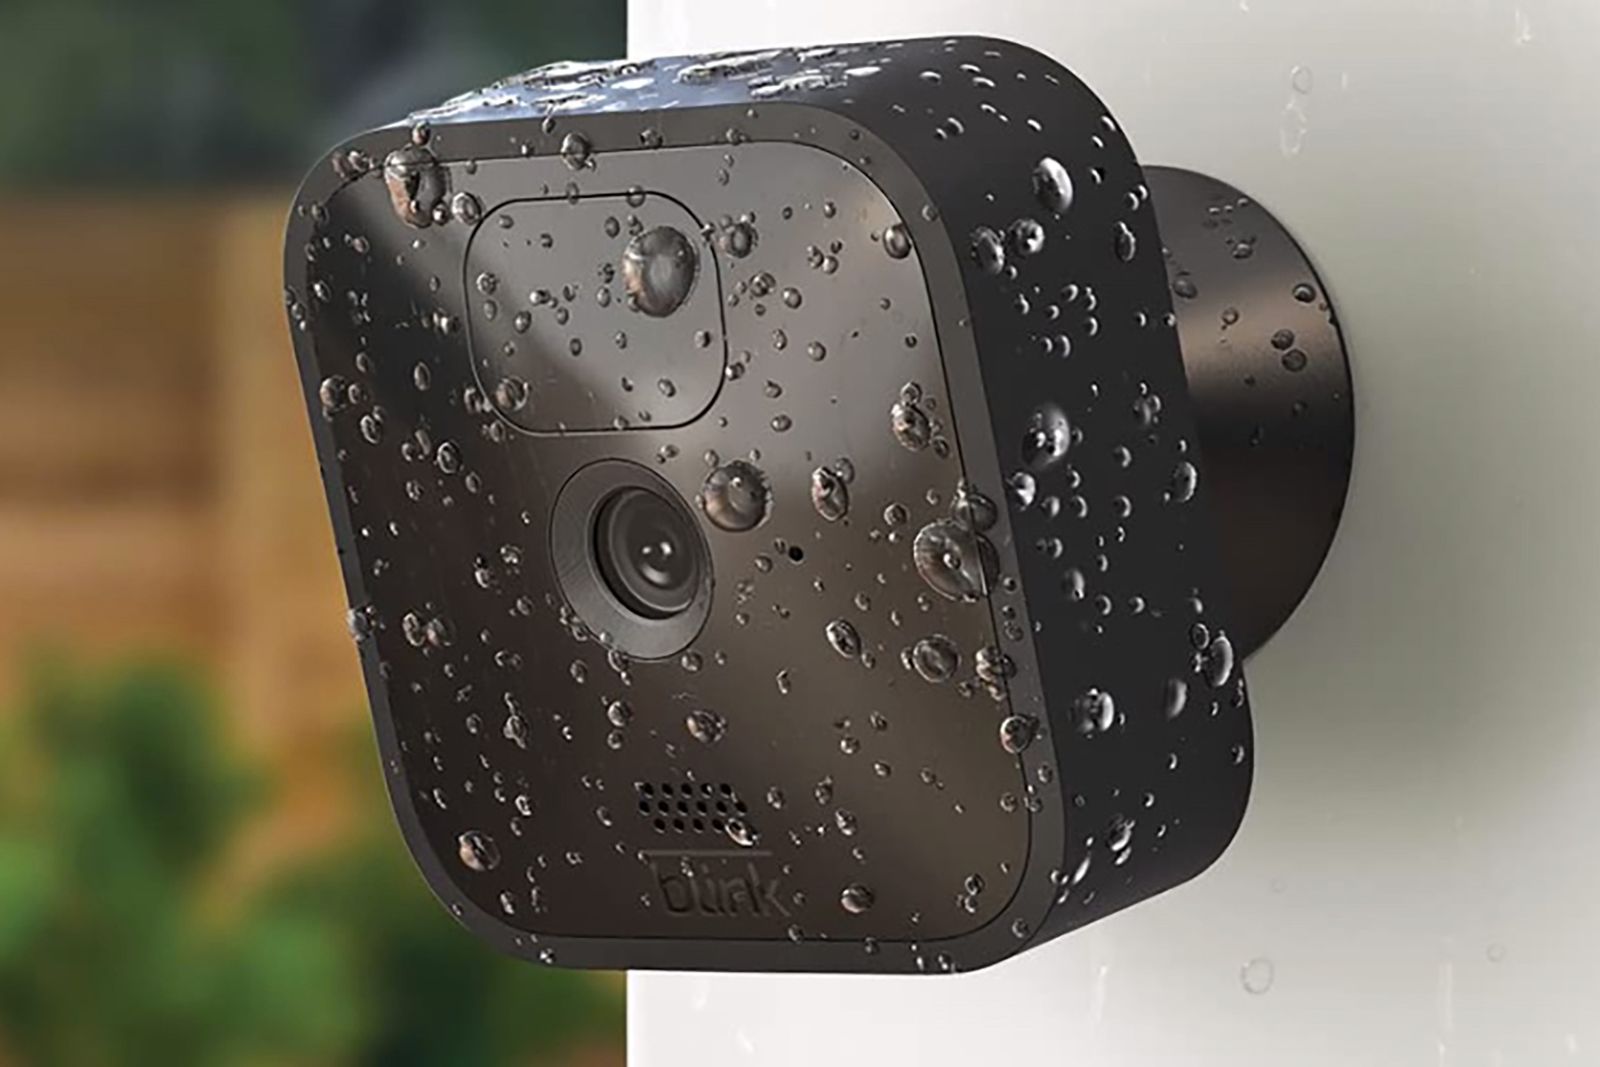 A 3-pack of Blink Outdoor cameras is half off in a last-minute Cyber Monday deal